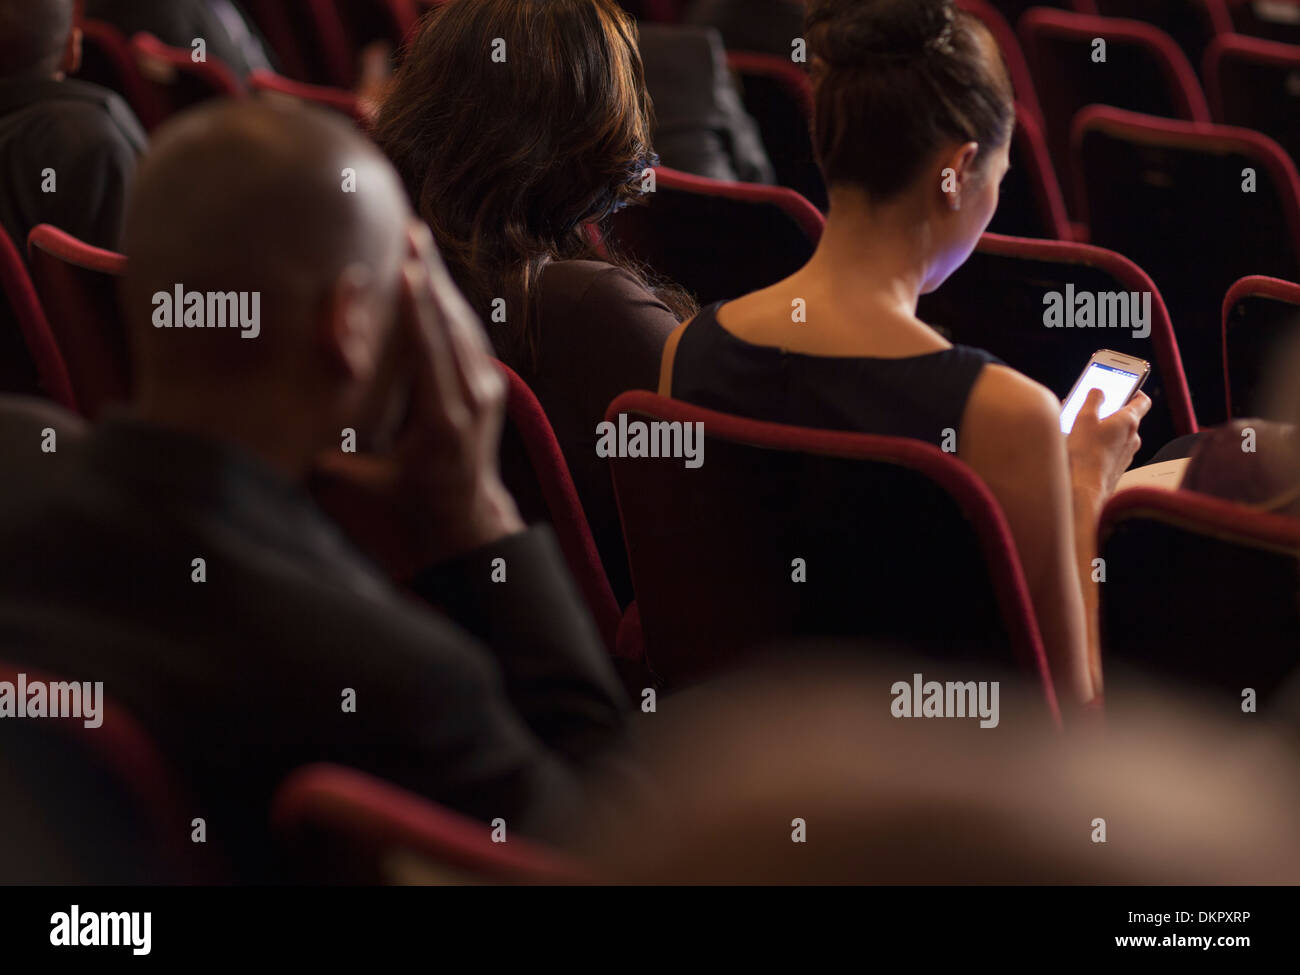 Rear view of woman using cell phone in theater audience Stock Photo